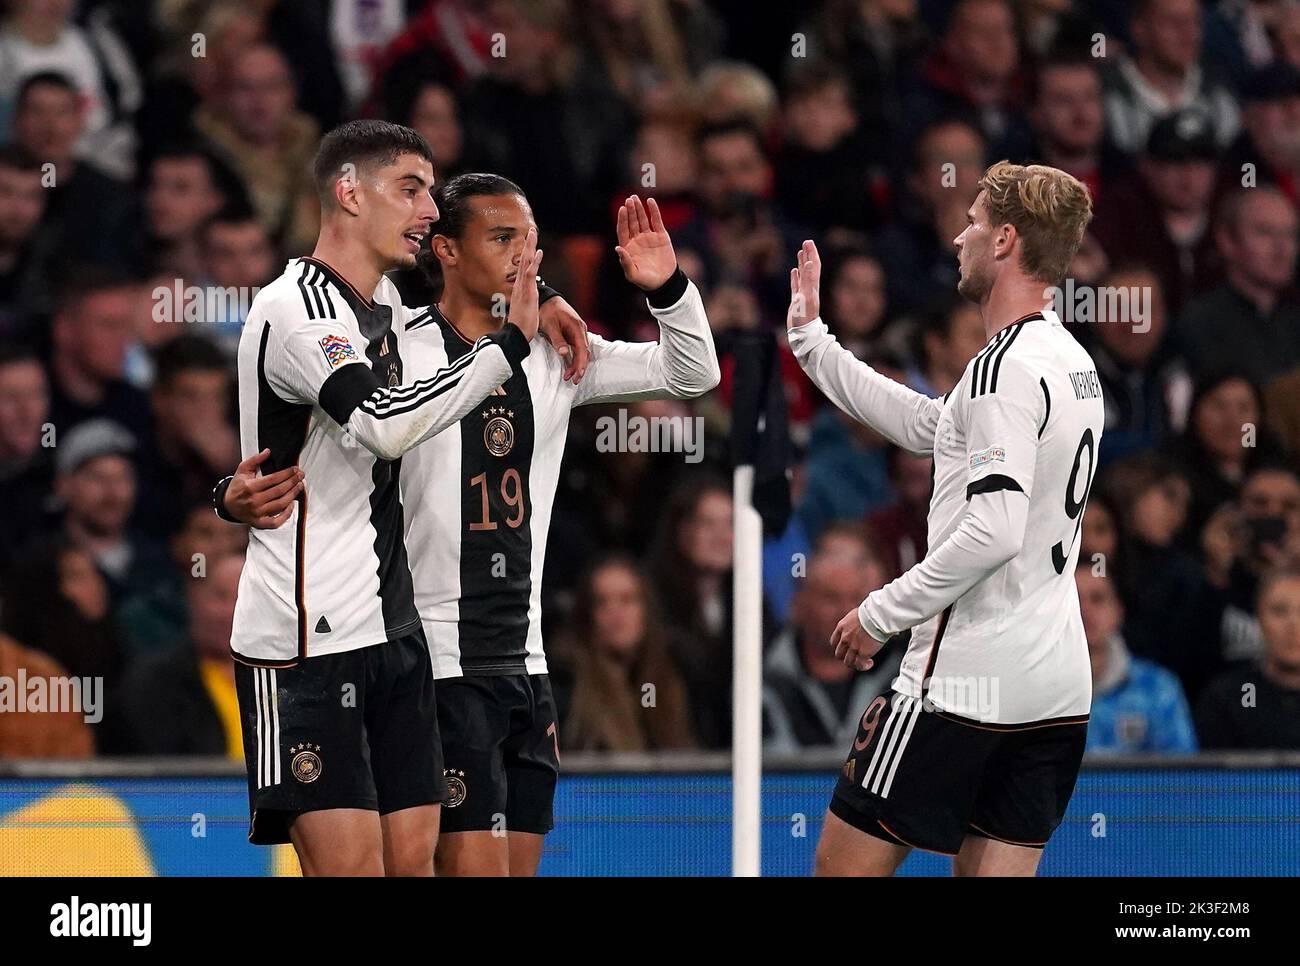 Germany's Kai Havertz celebrates scoring their side's second goal of the game with team-mates Leroy Sane and Timo Werner (right) during the UEFA Nations League match at Wembley Stadium, London. Picture date: Monday September 26, 2022. Stock Photo